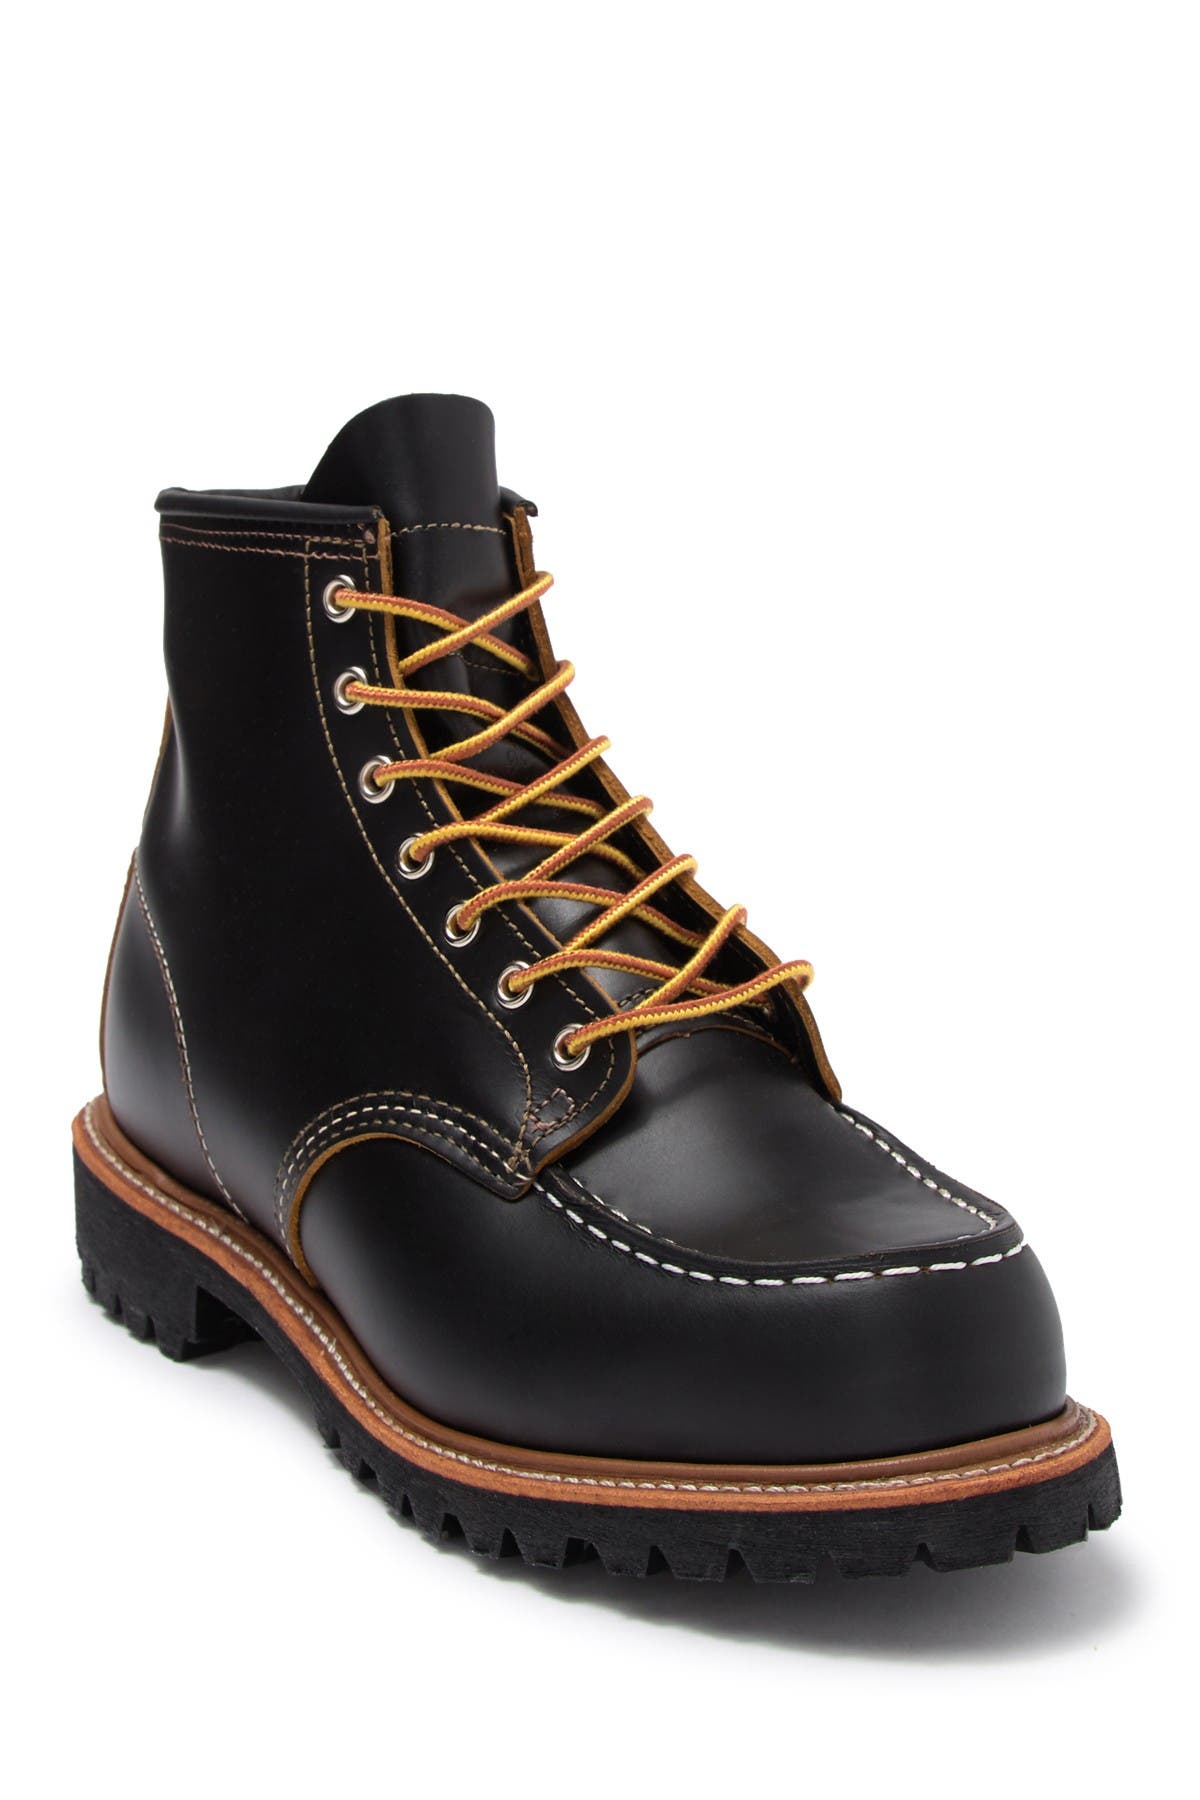 red wing wide boots